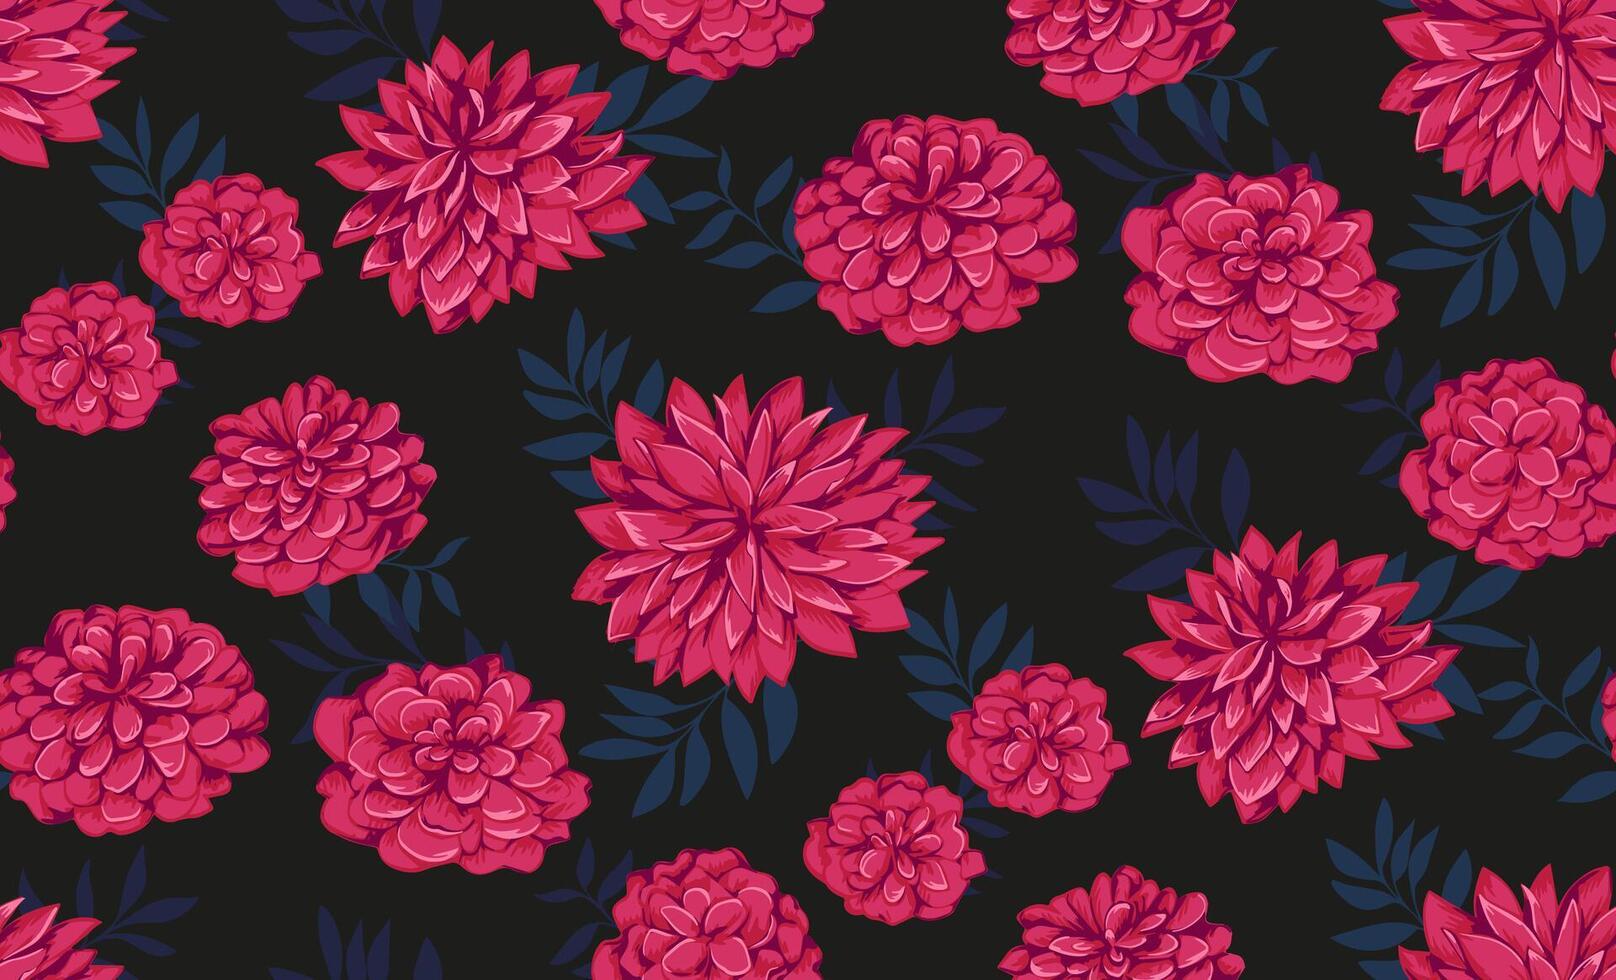 Seamless pattern with red artistic, abstract flowers and shapes leaves on a dark black background. hand drawn. Stylized peonies, dahlias, chrysanthemums patterned. Template for design, print vector